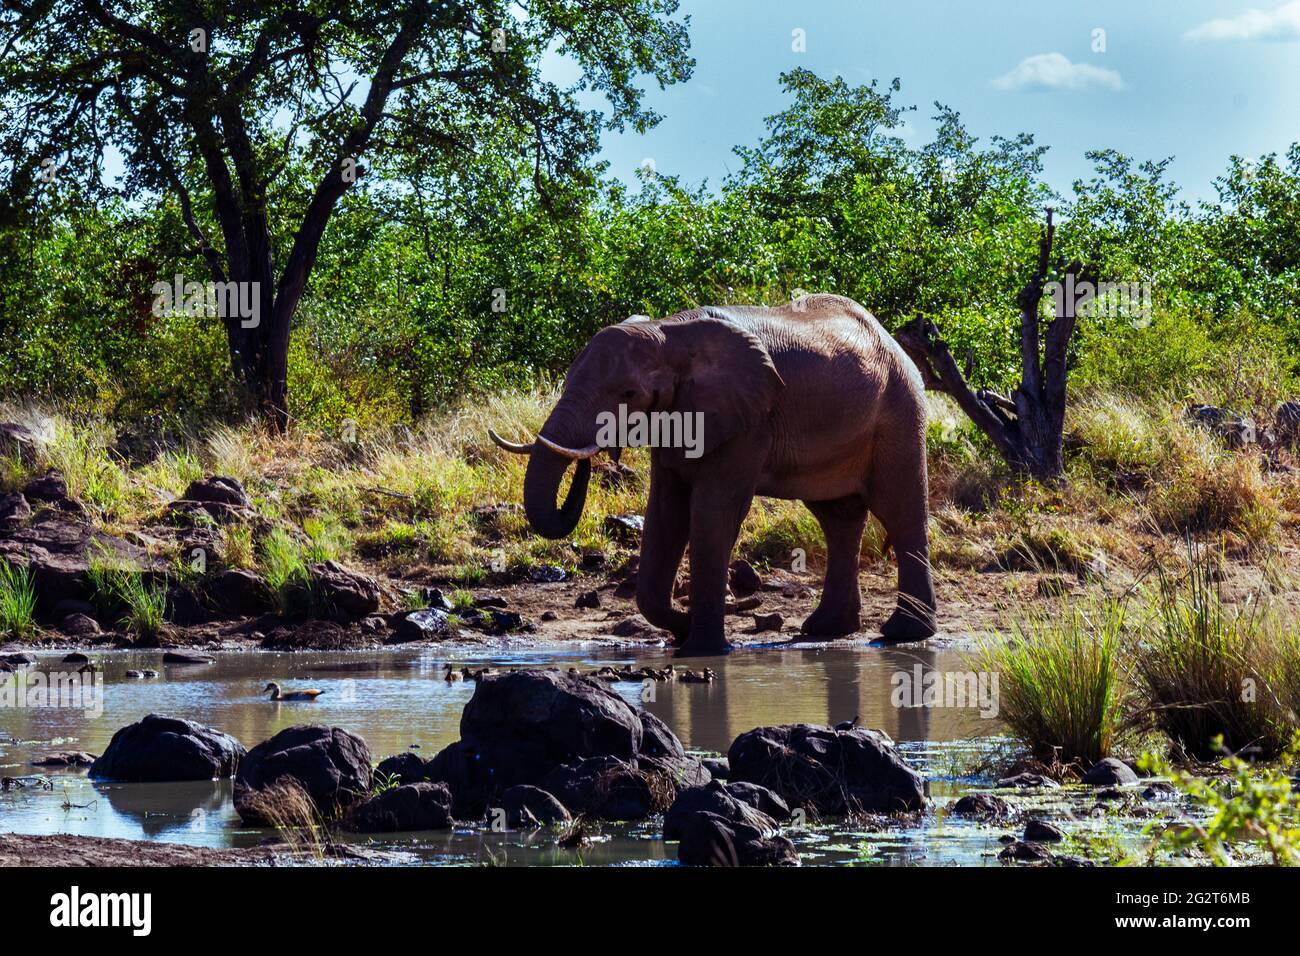 Elephant drinking water at a pond of water in the African bush Stock Photo